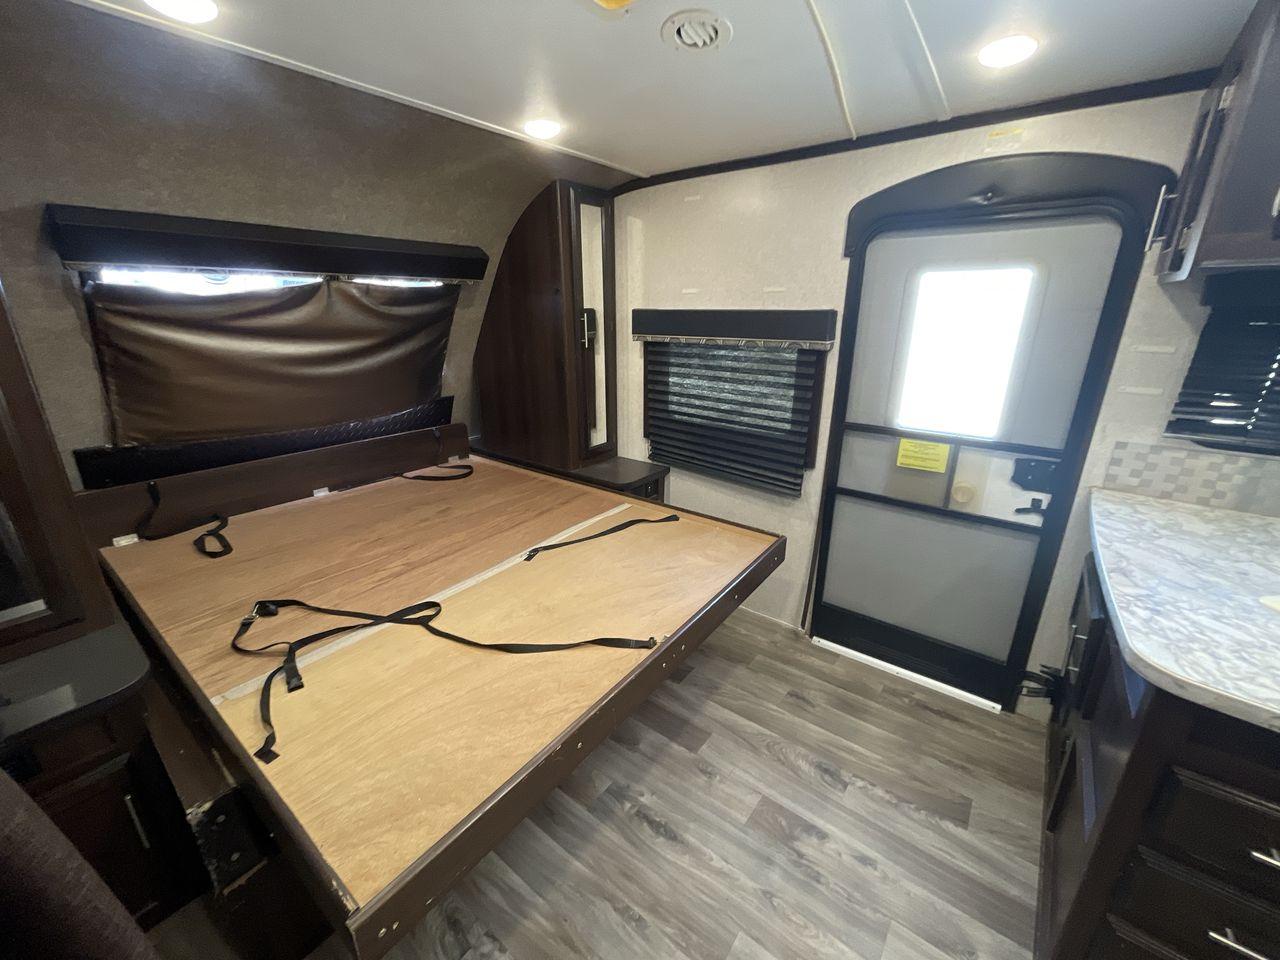 2018 WHITE JAYCO JAY FLIGHT 23MRB (1UJBJ0BN5J1) , Length: 28.17 ft | Dry Weight: 5,560 lbs. | Gross Weight: 7,250 lbs. | Slides: 1 transmission, located at 4319 N Main Street, Cleburne, TX, 76033, (817) 221-0660, 32.435829, -97.384178 - The 2018 Jayco Jay Flight 23MRB is a travel trailer that encapsulates both compactness and luxury for unparalleled camping experiences. Spanning 28 feet in length, this model boasts a thoughtfully arranged interior featuring a single slide-out, seamlessly amplifying the living space. The Jay Flight - Photo #18